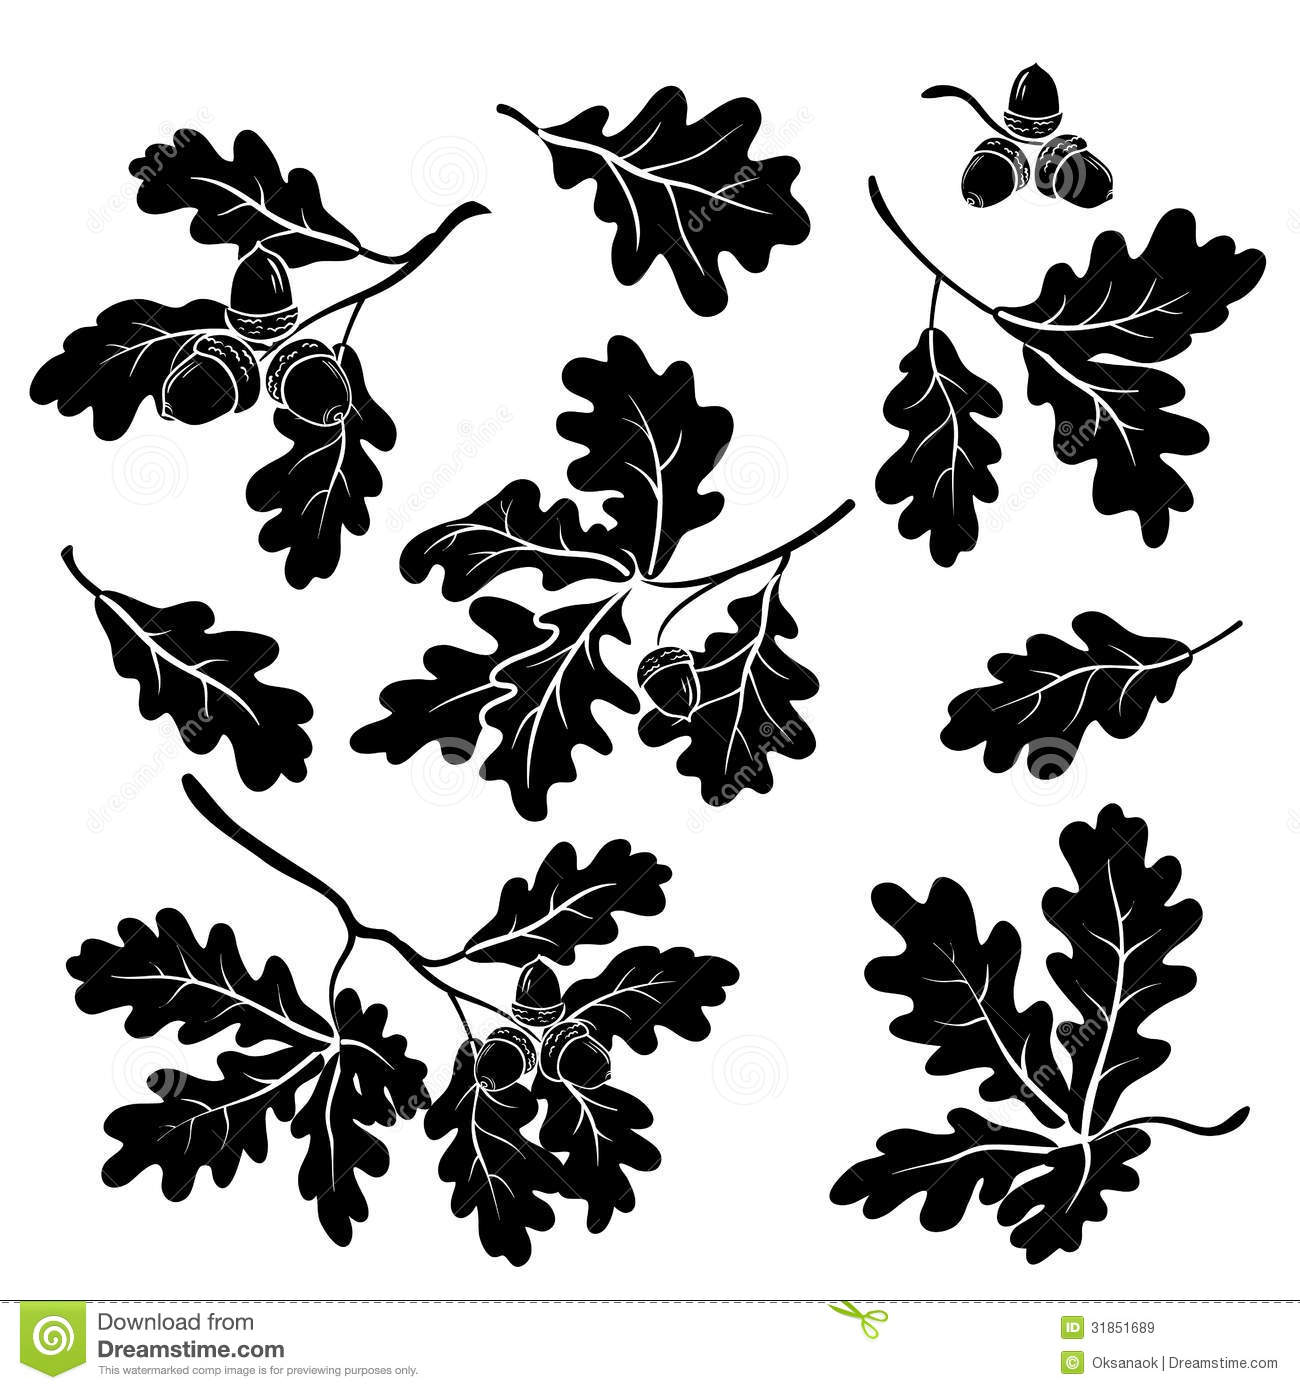 Leaves And Acorn Clipart Black And White Leaves And Acorns Black